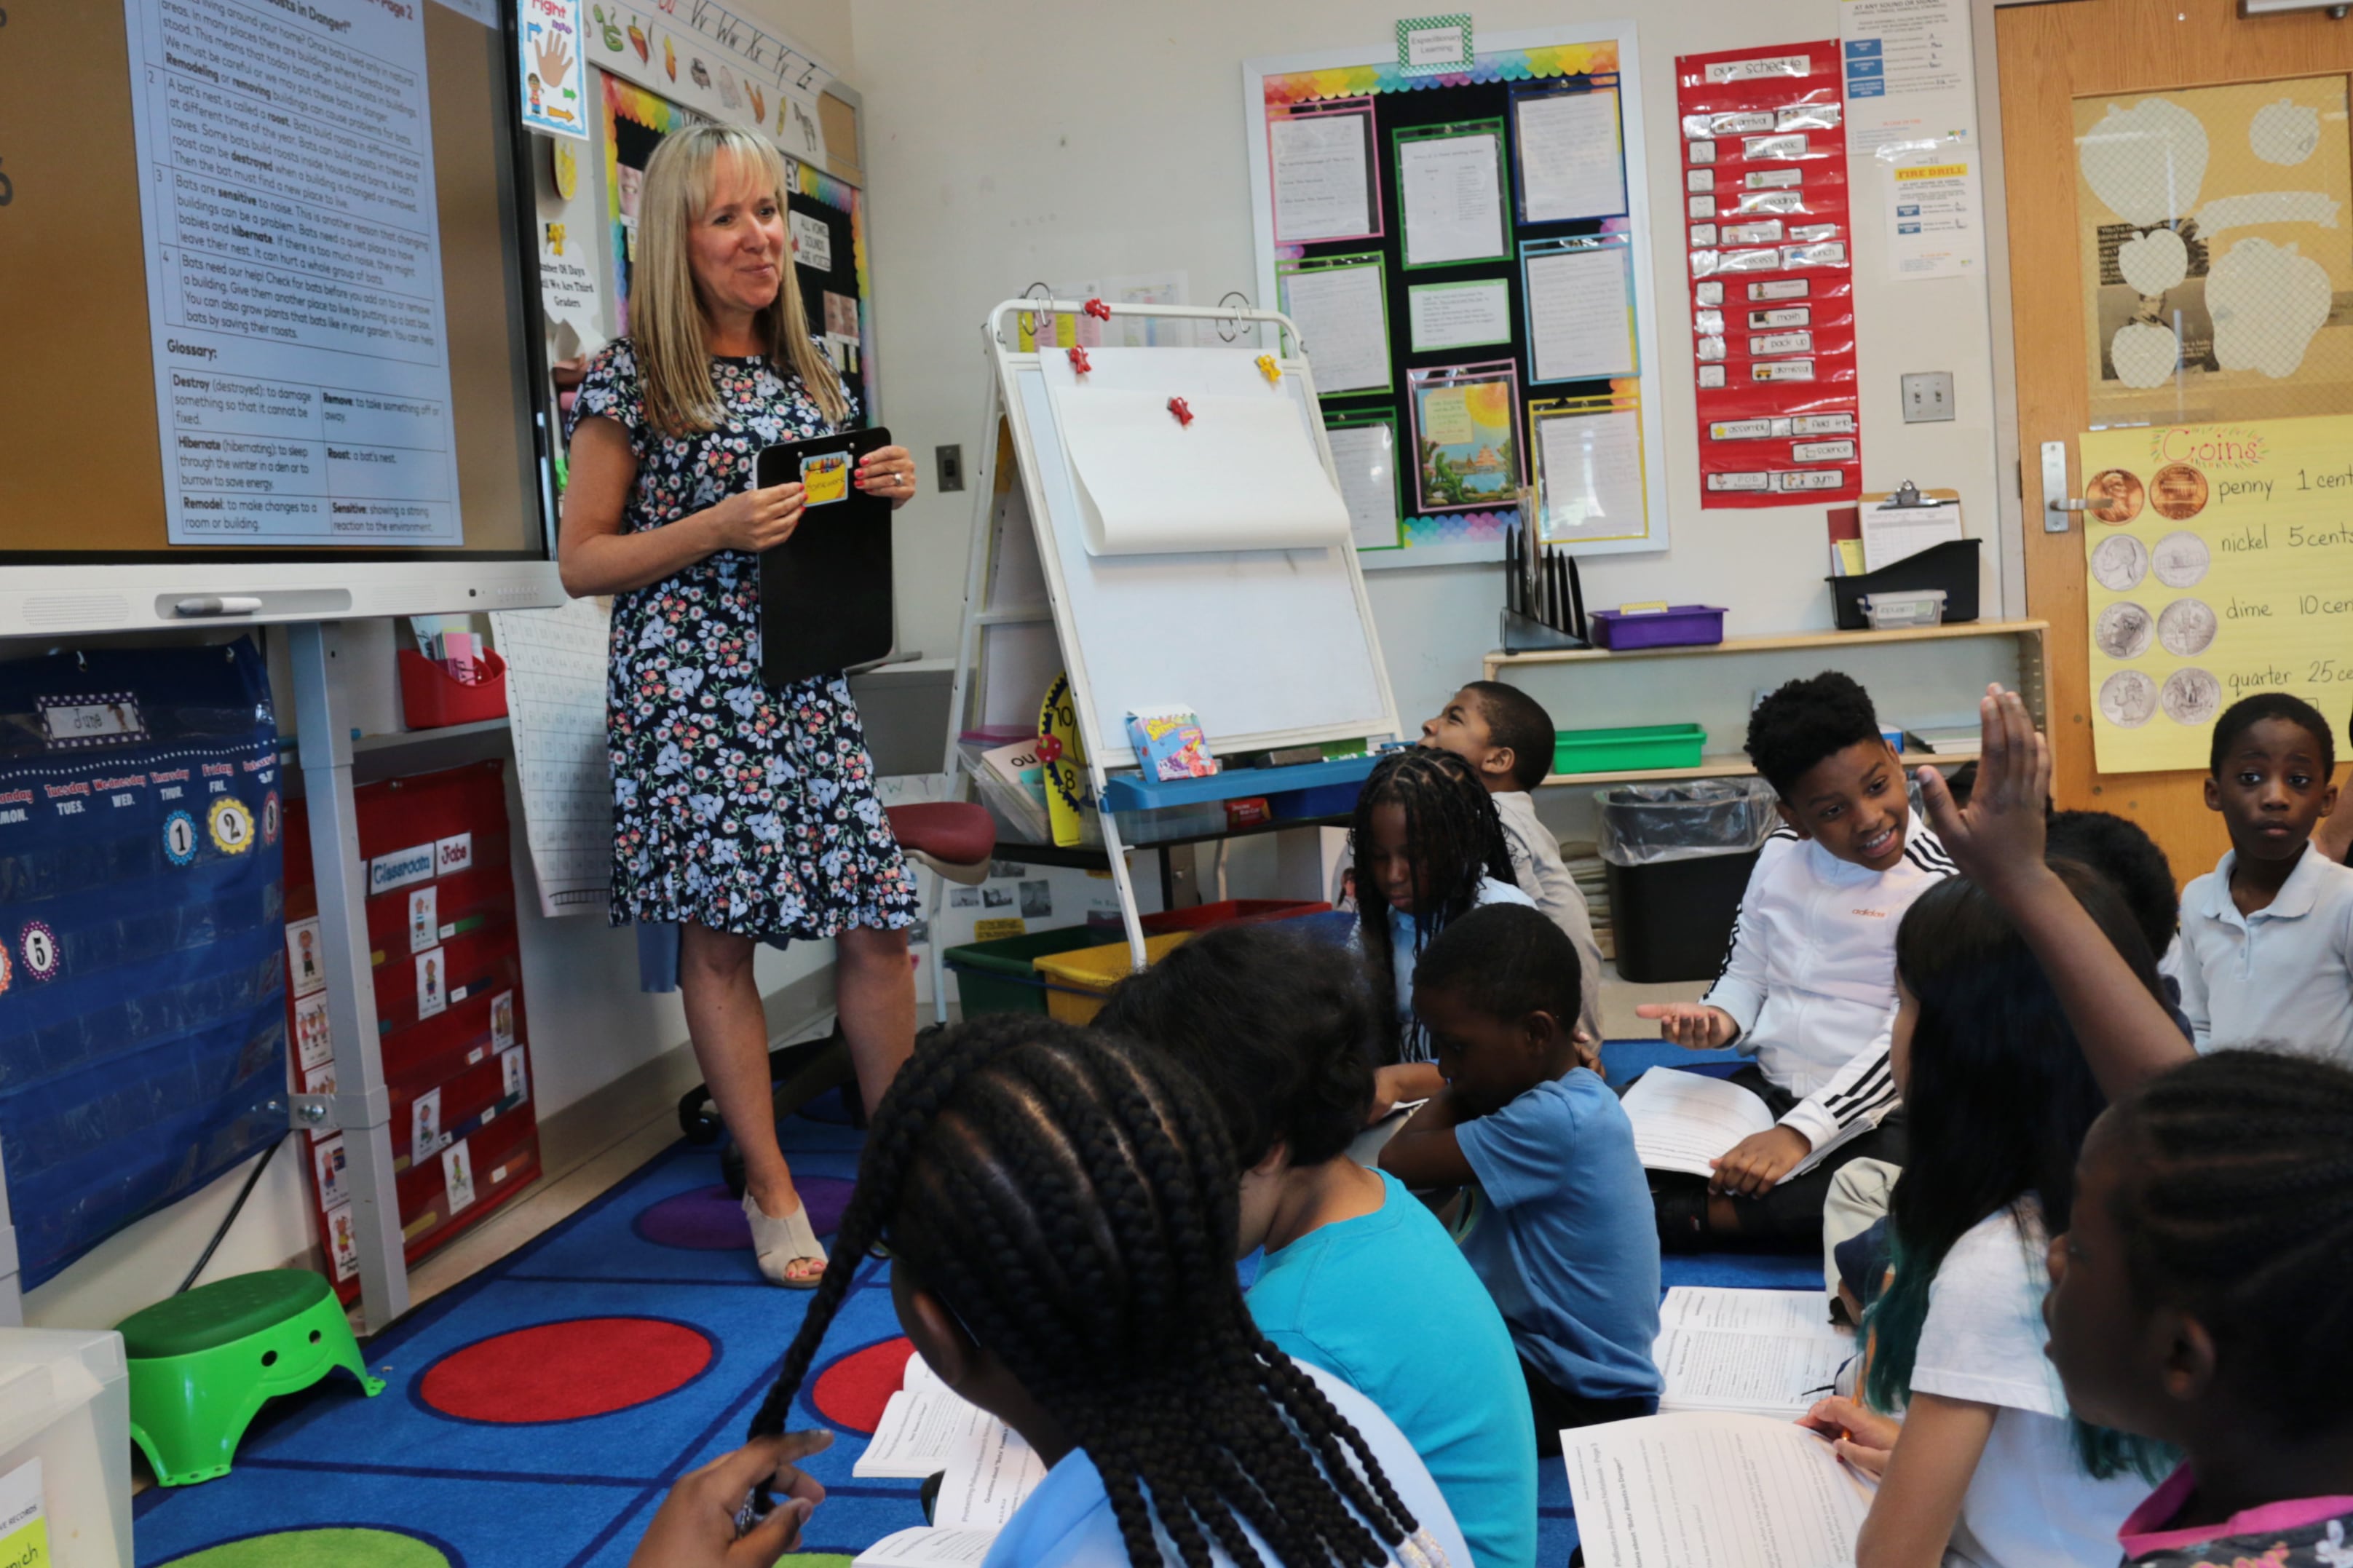 A blonde woman in a blue patterned dress stands in front of a classroom of students.